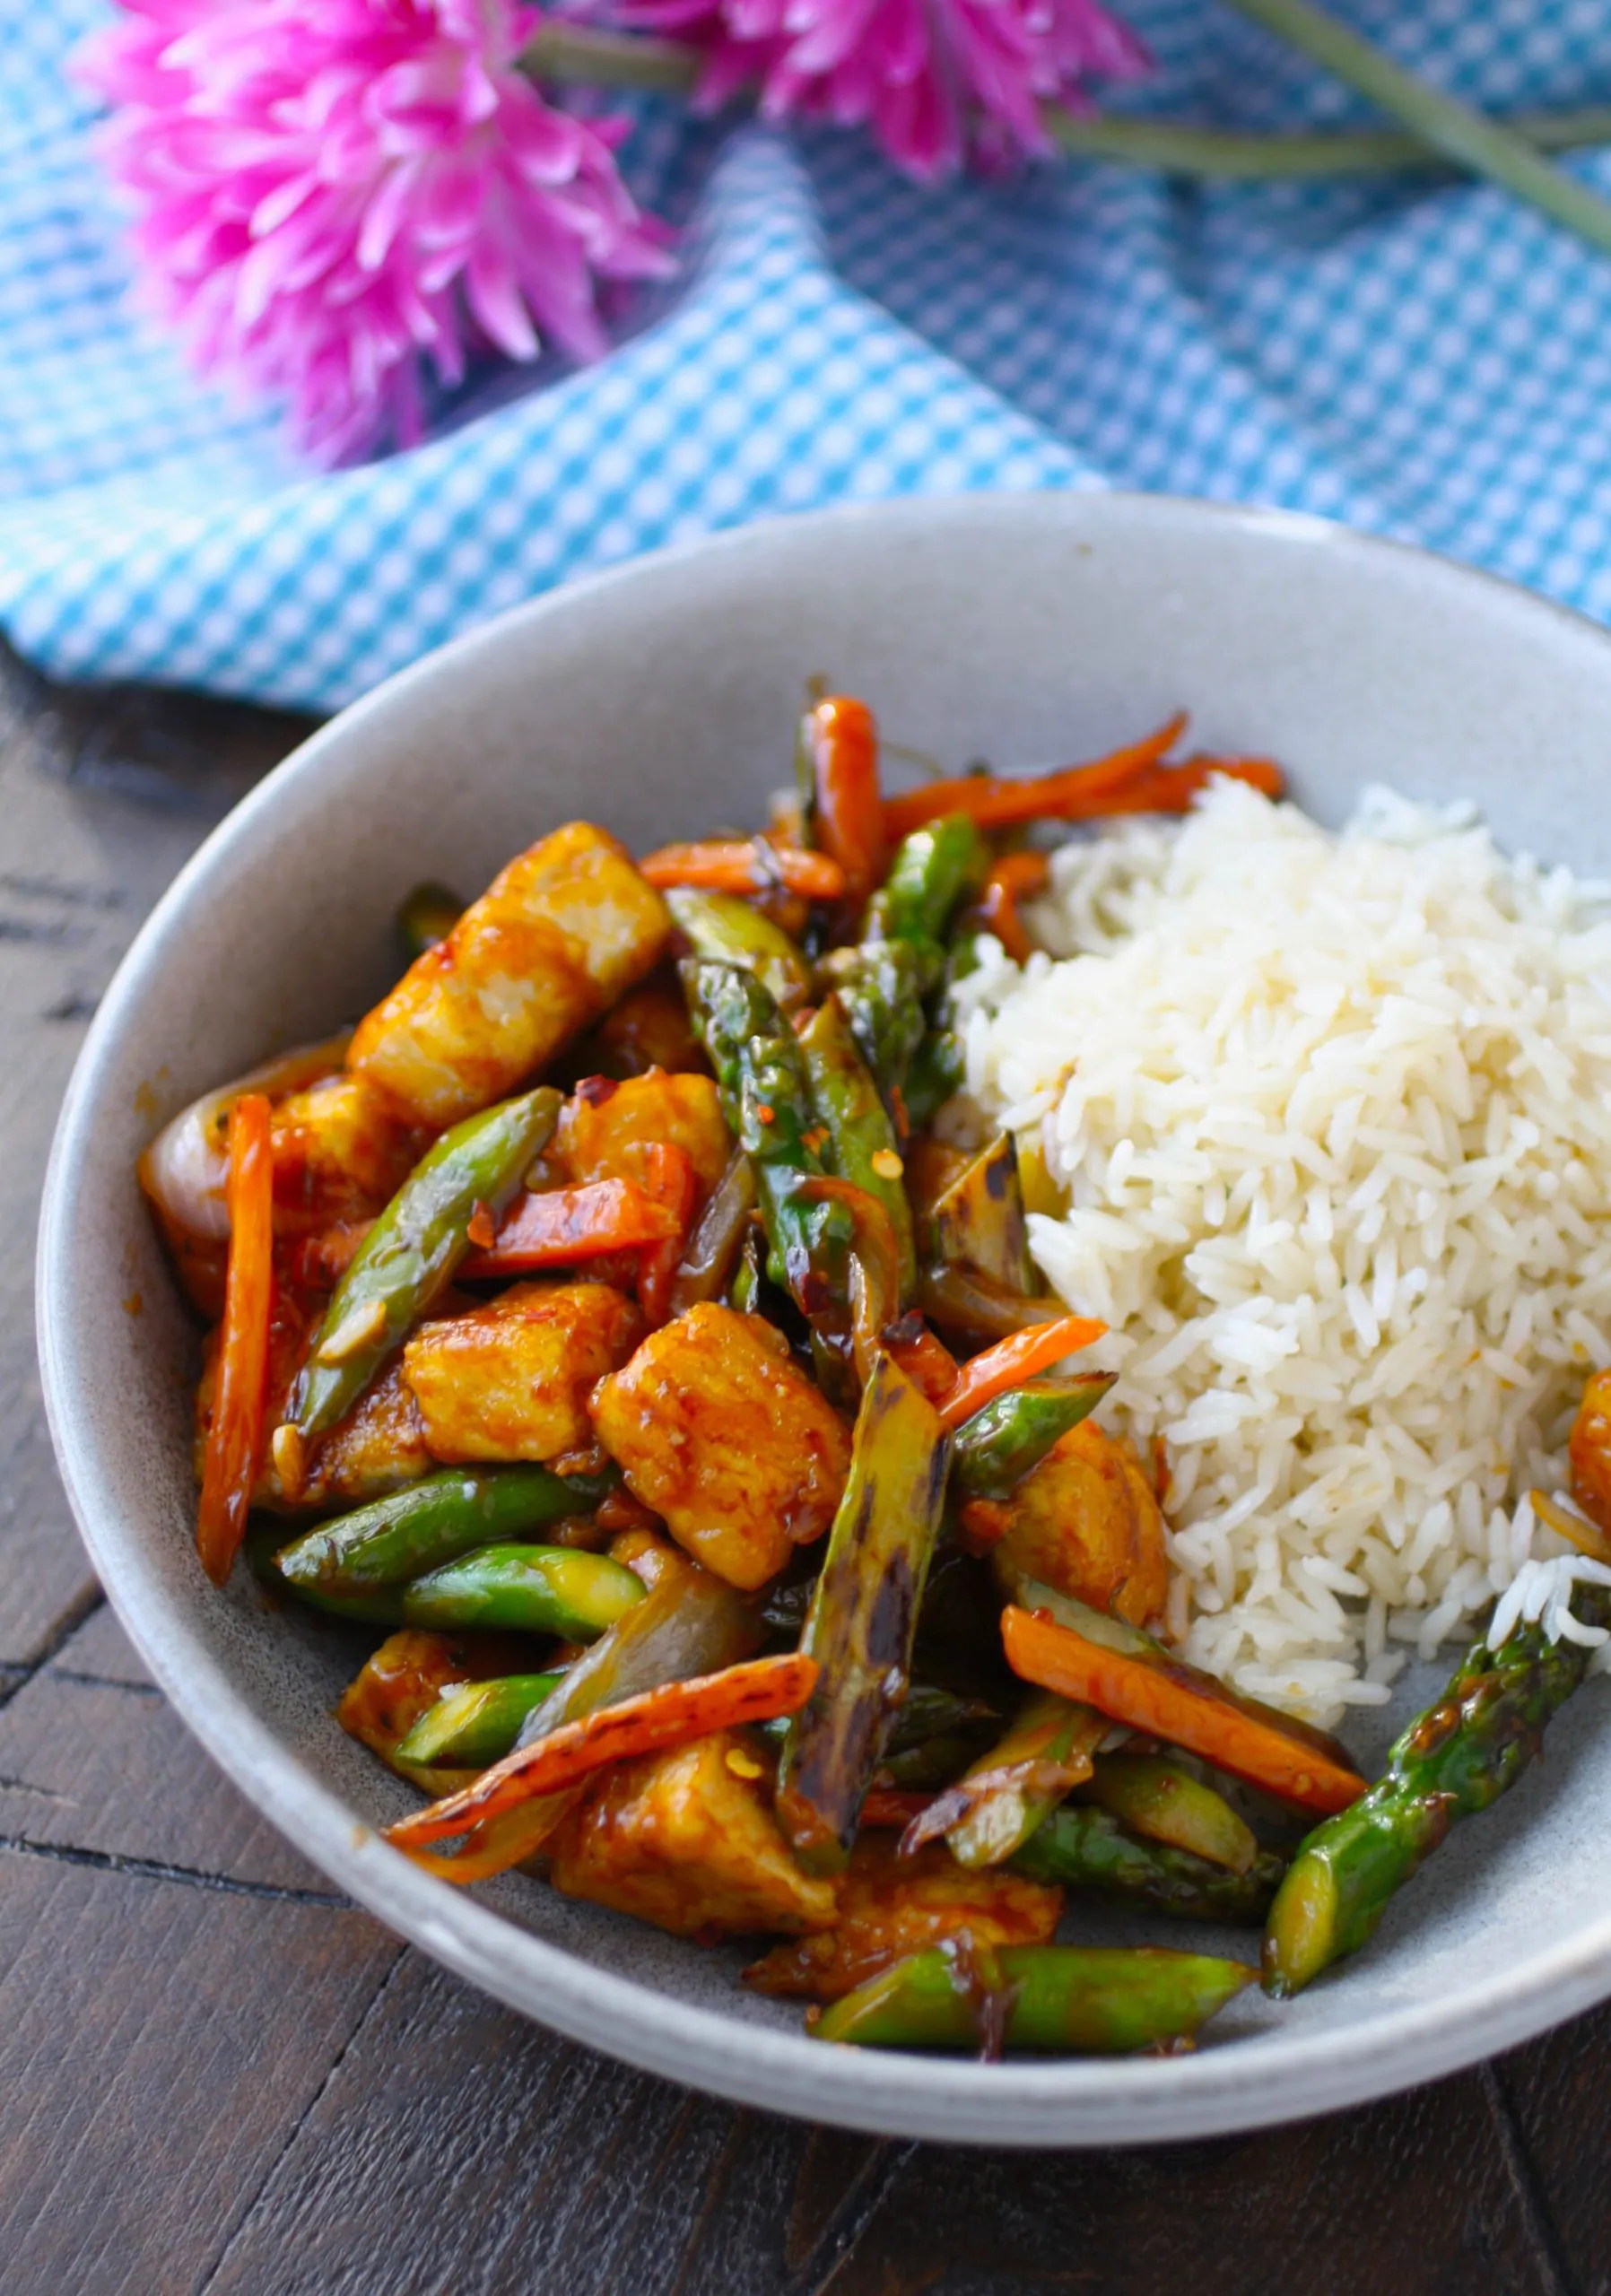 Stir-Fried Tofu and Vegetables is filling, colorful, and flavorful!